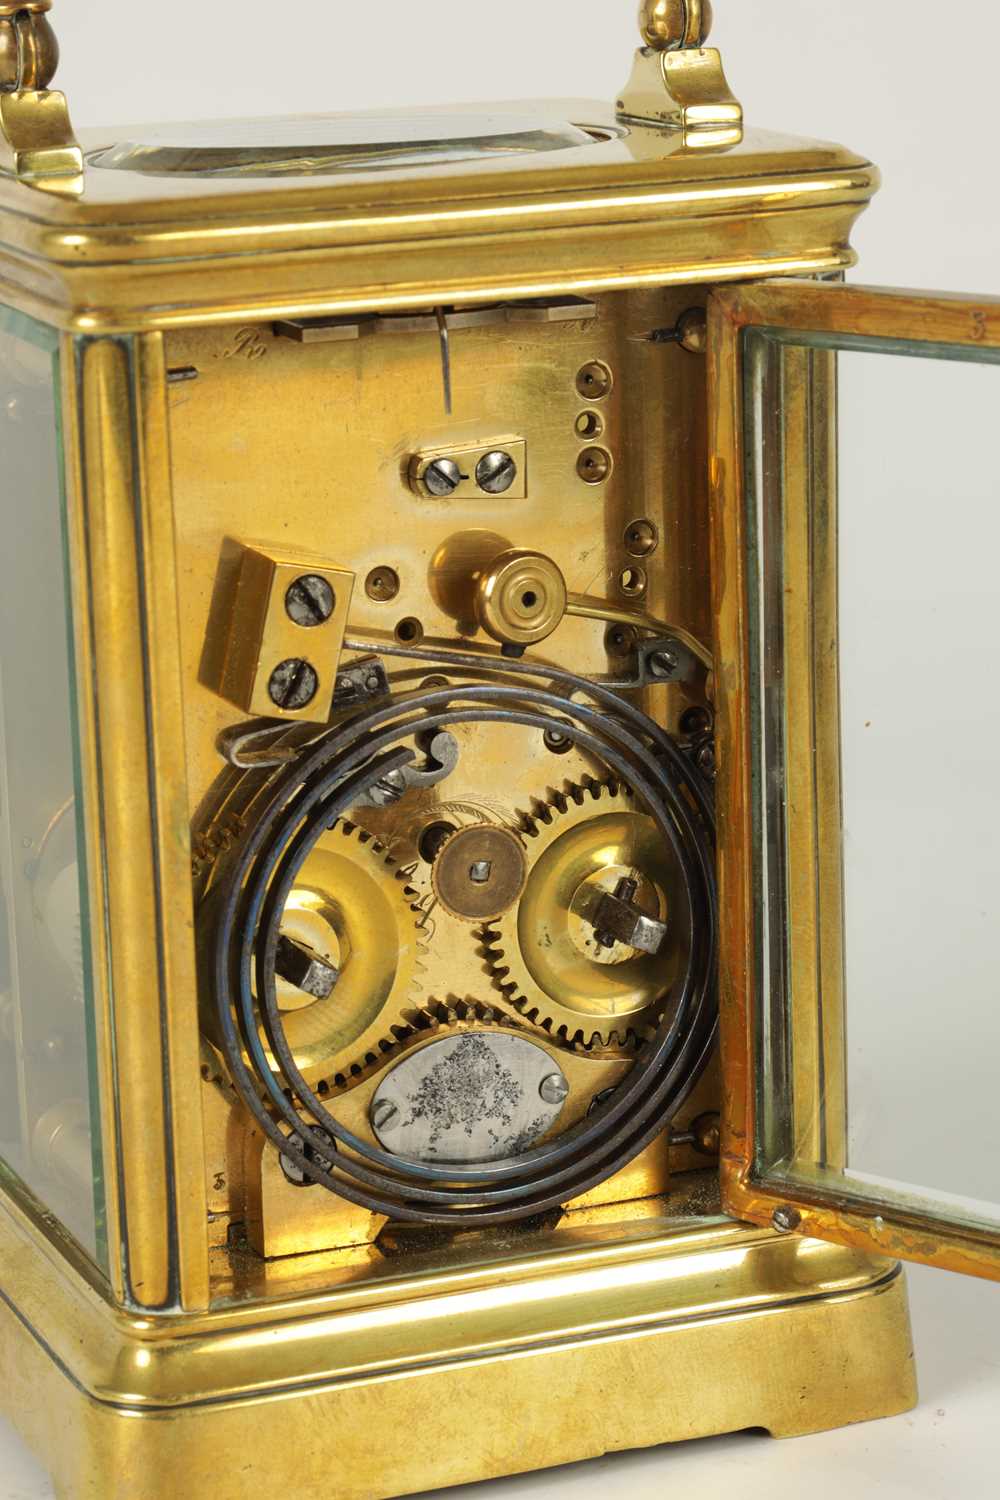 LE ROY & FILS, FRANCE A RARE LATE 19TH CENTURY BRASS CASED BOTTOM WIND STRIKING CARRIAGE CLOCK - Image 4 of 6